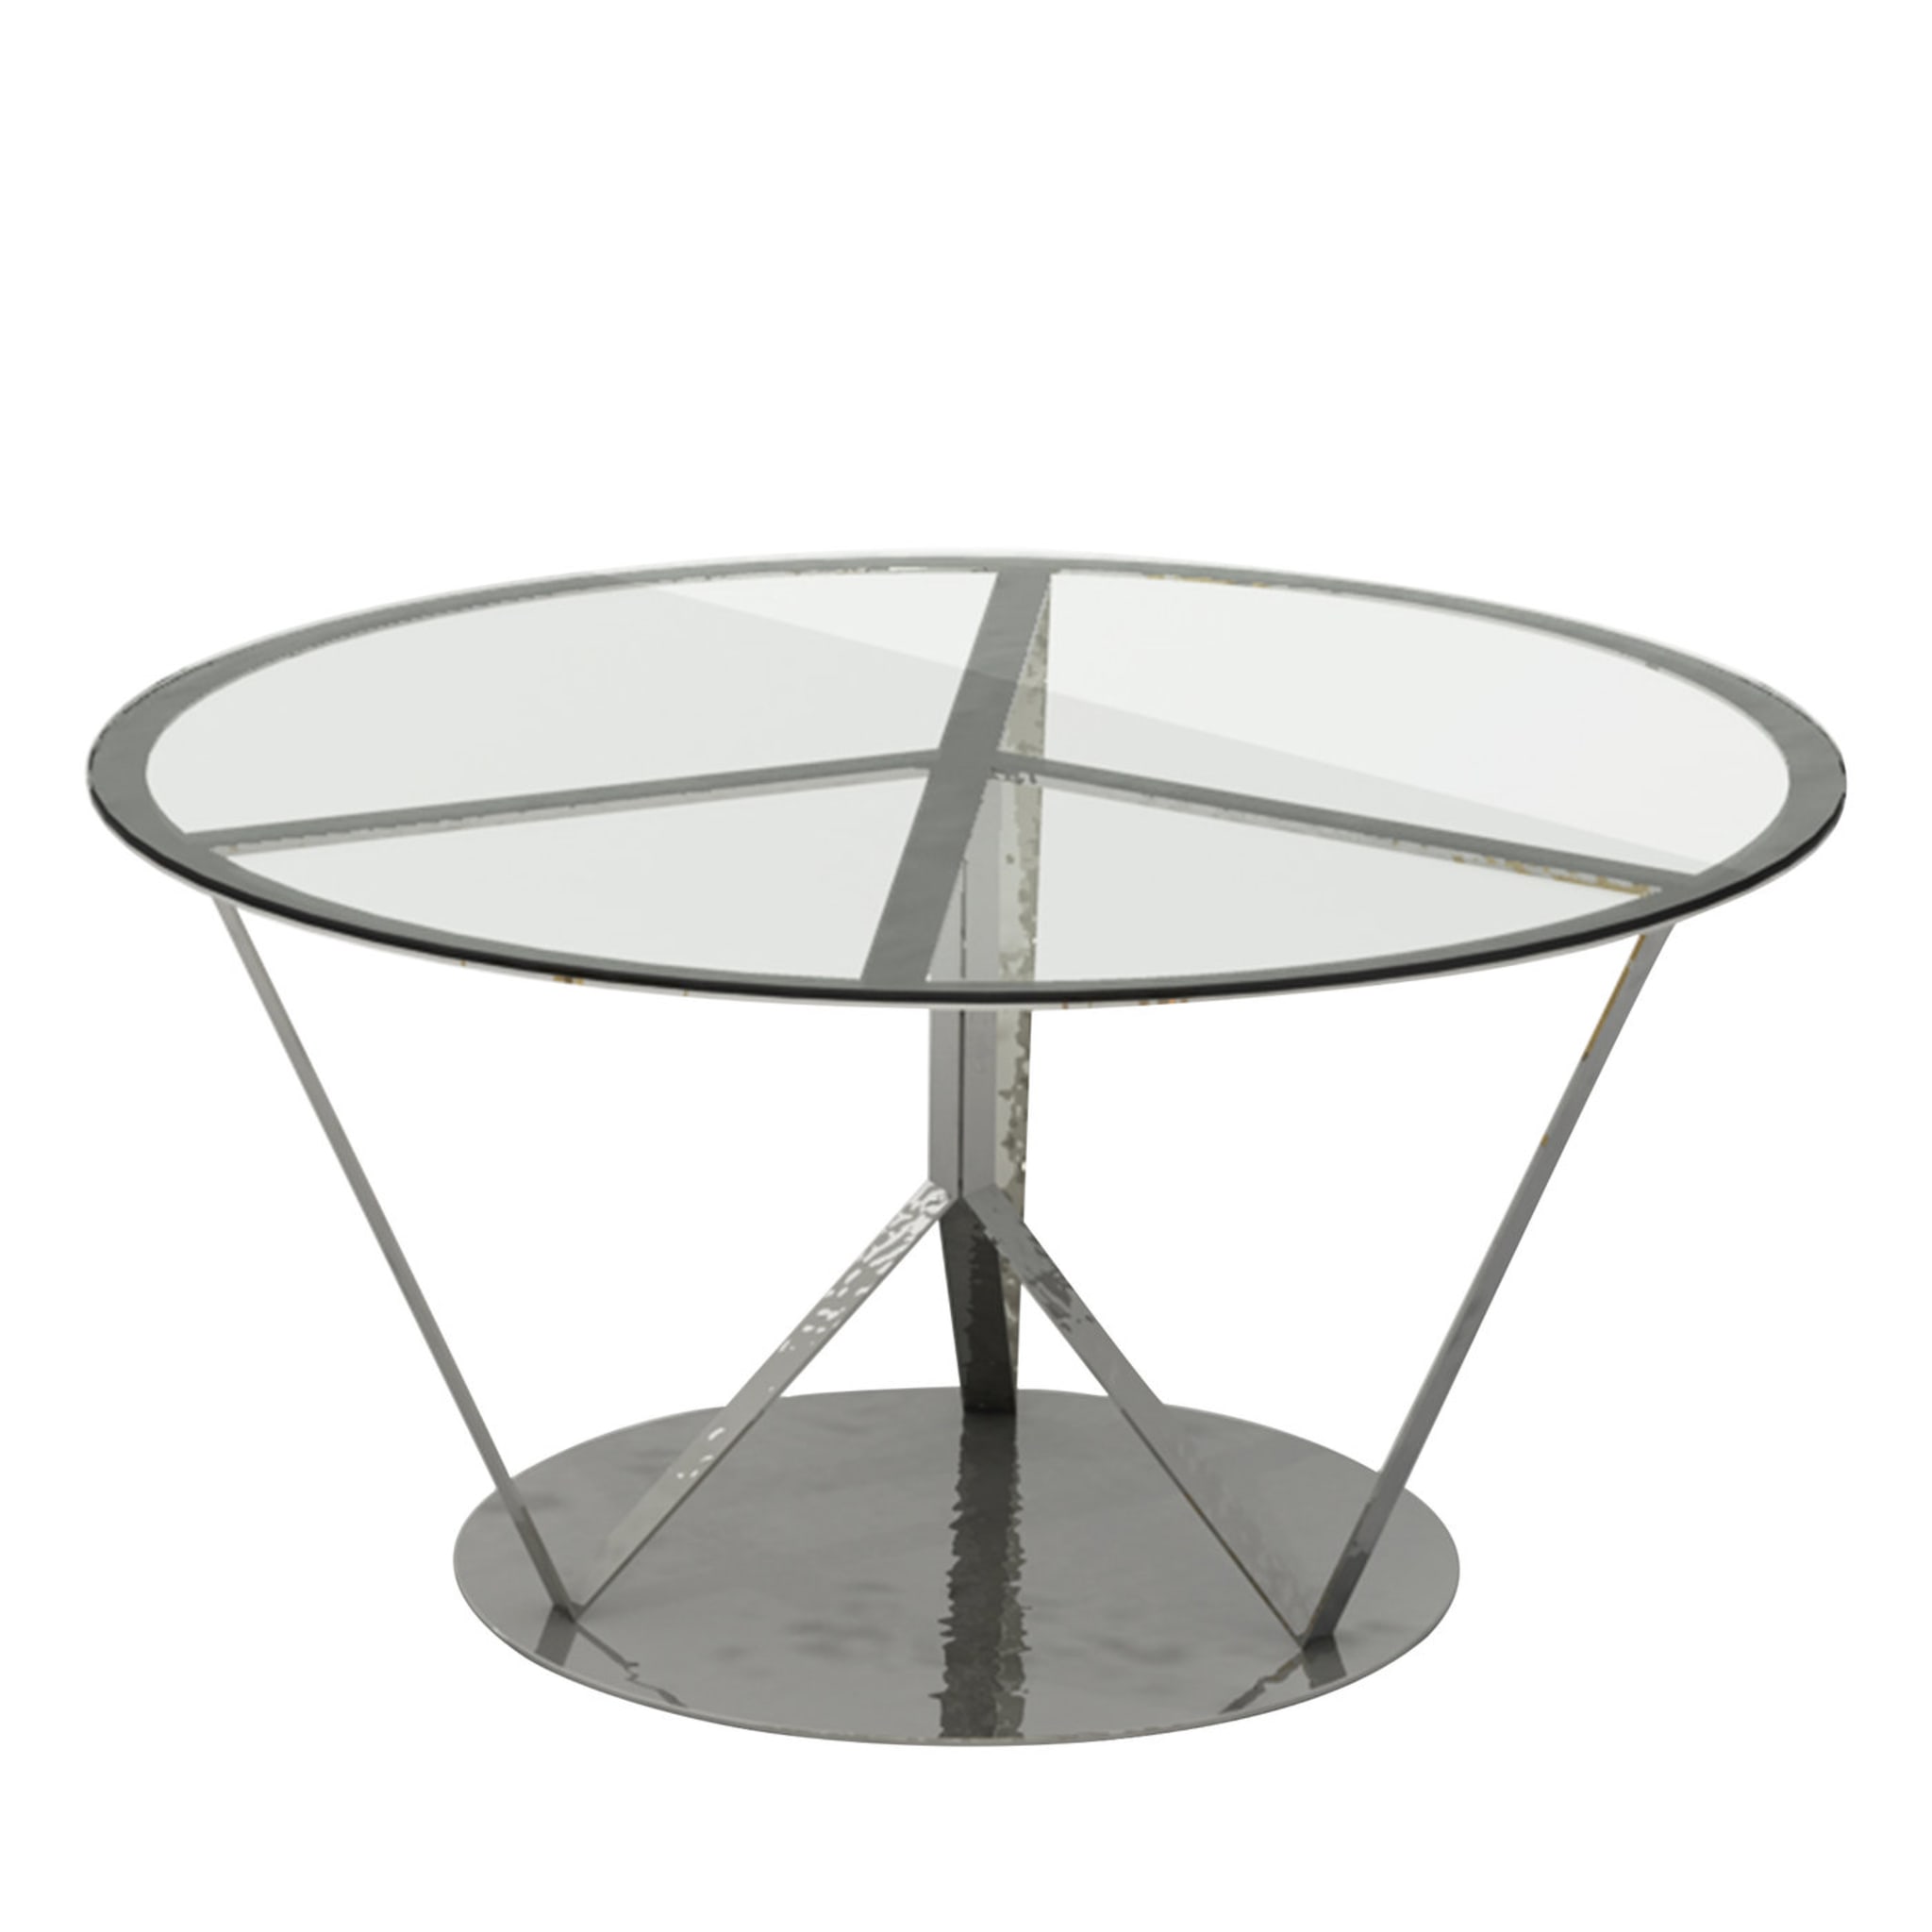 Pace Silver Table by Garilab by Piter Perbellini - Main view